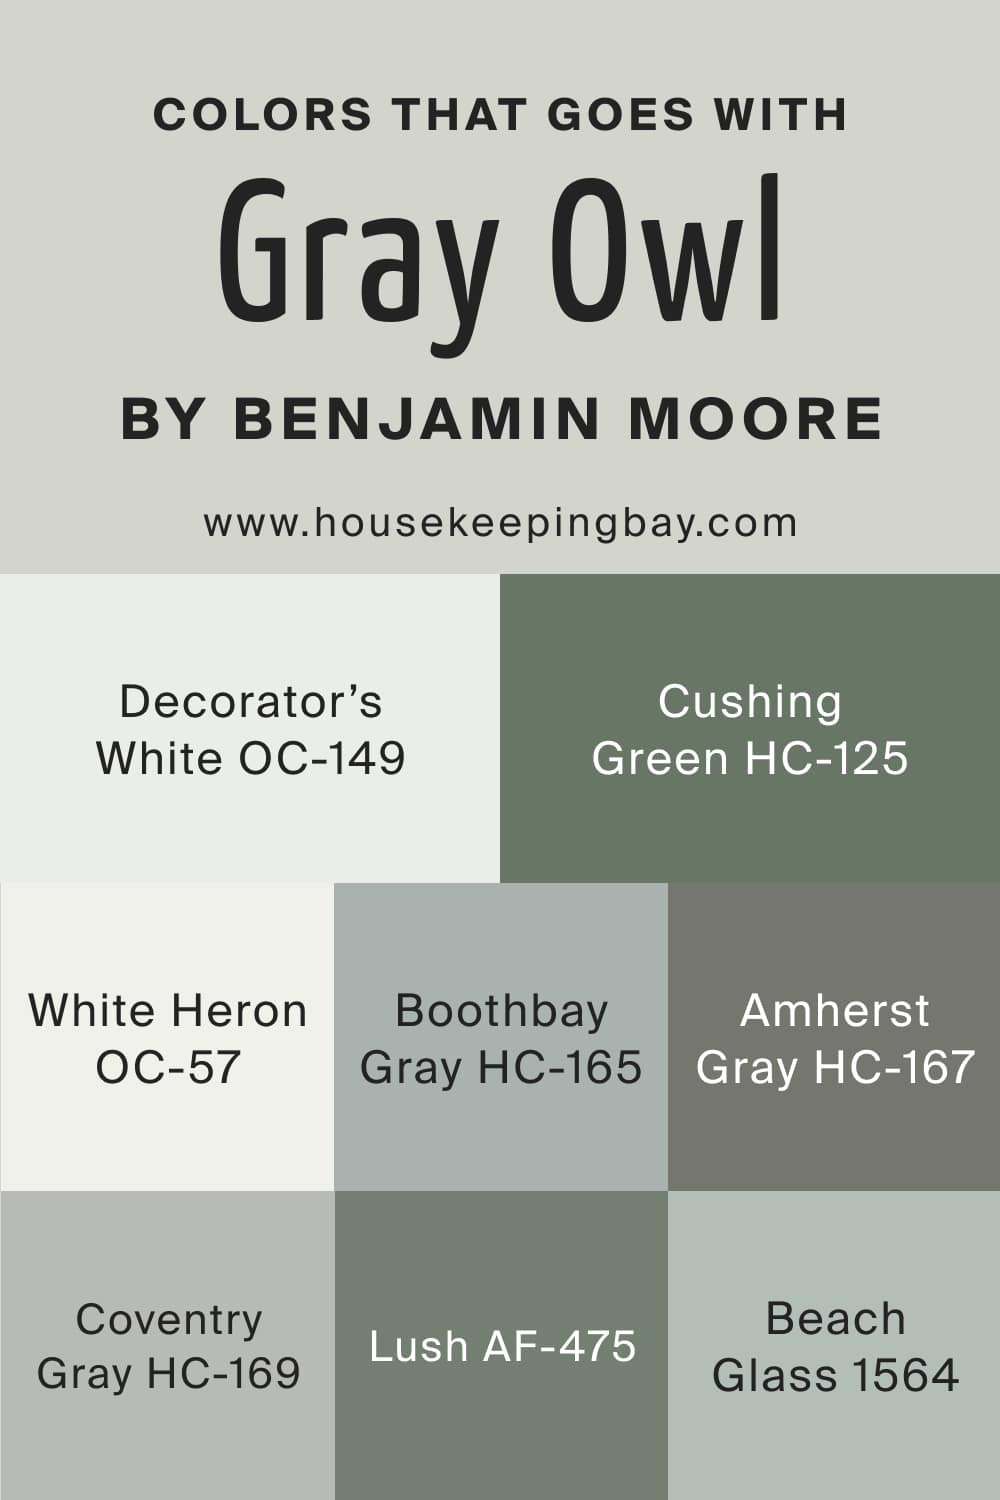 Colors that goes with Gray Owl 2137 60 by Benjamin Moore